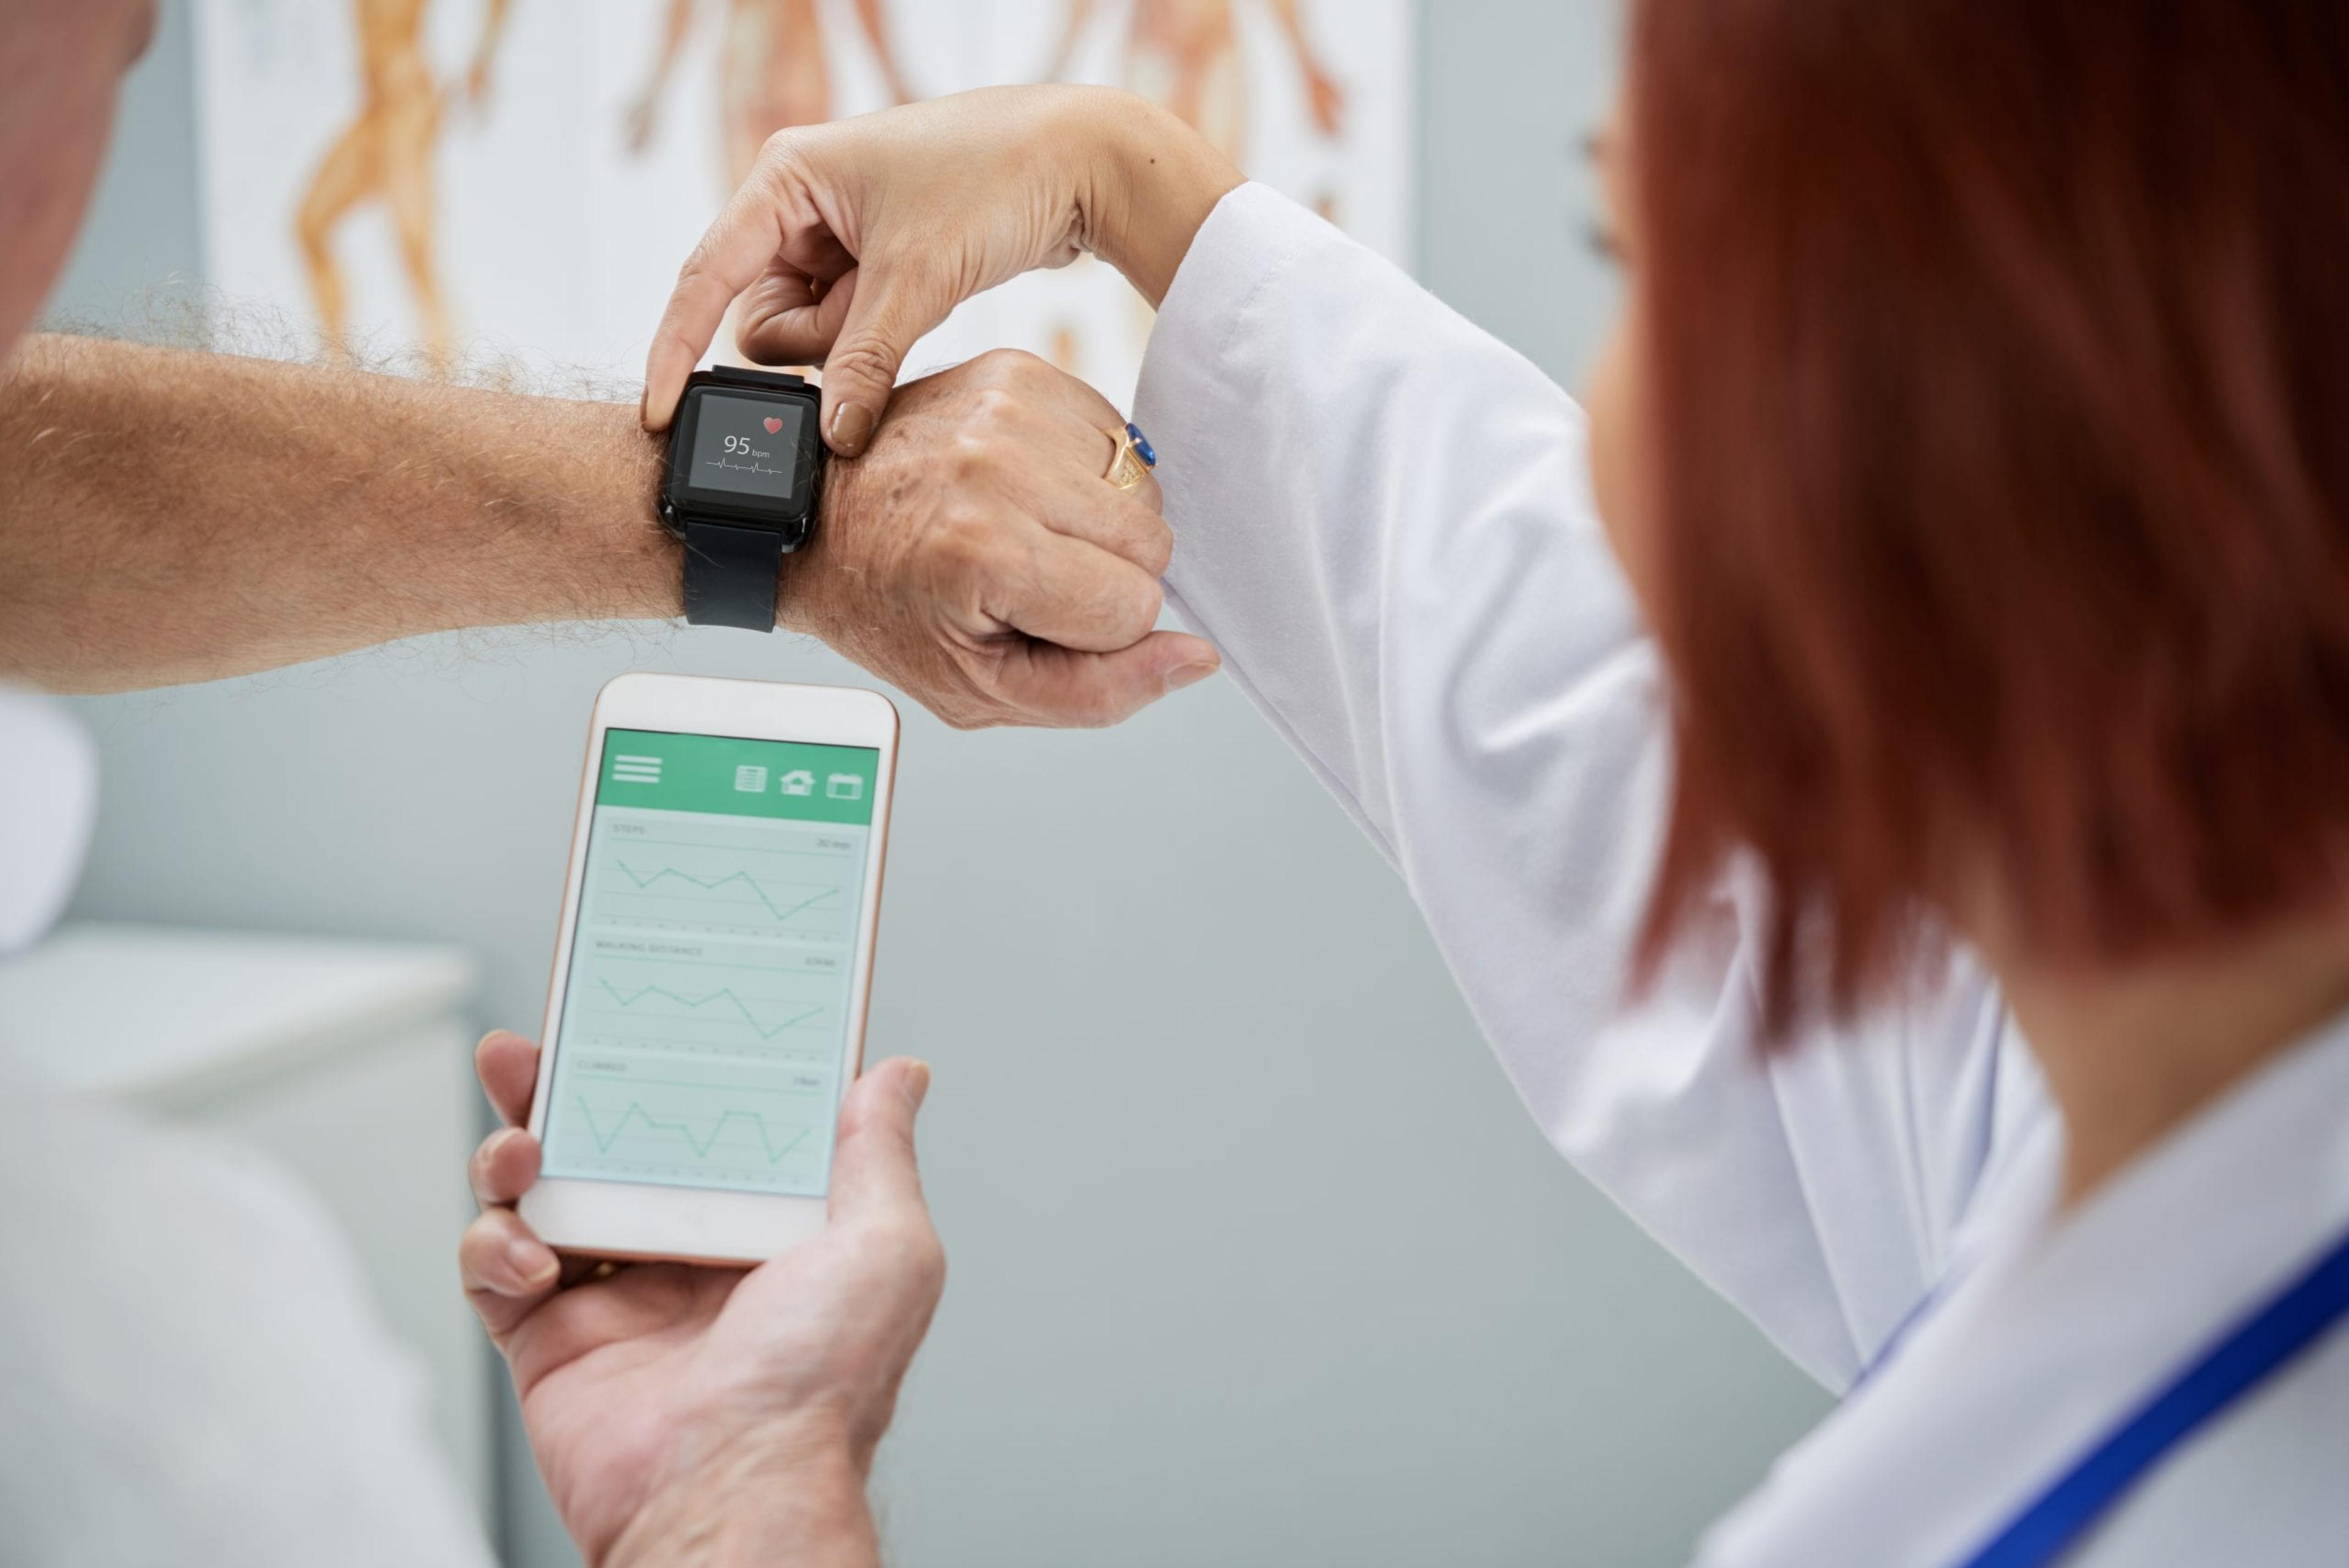 Doctor shows patient how a watch connects with an app on phone.